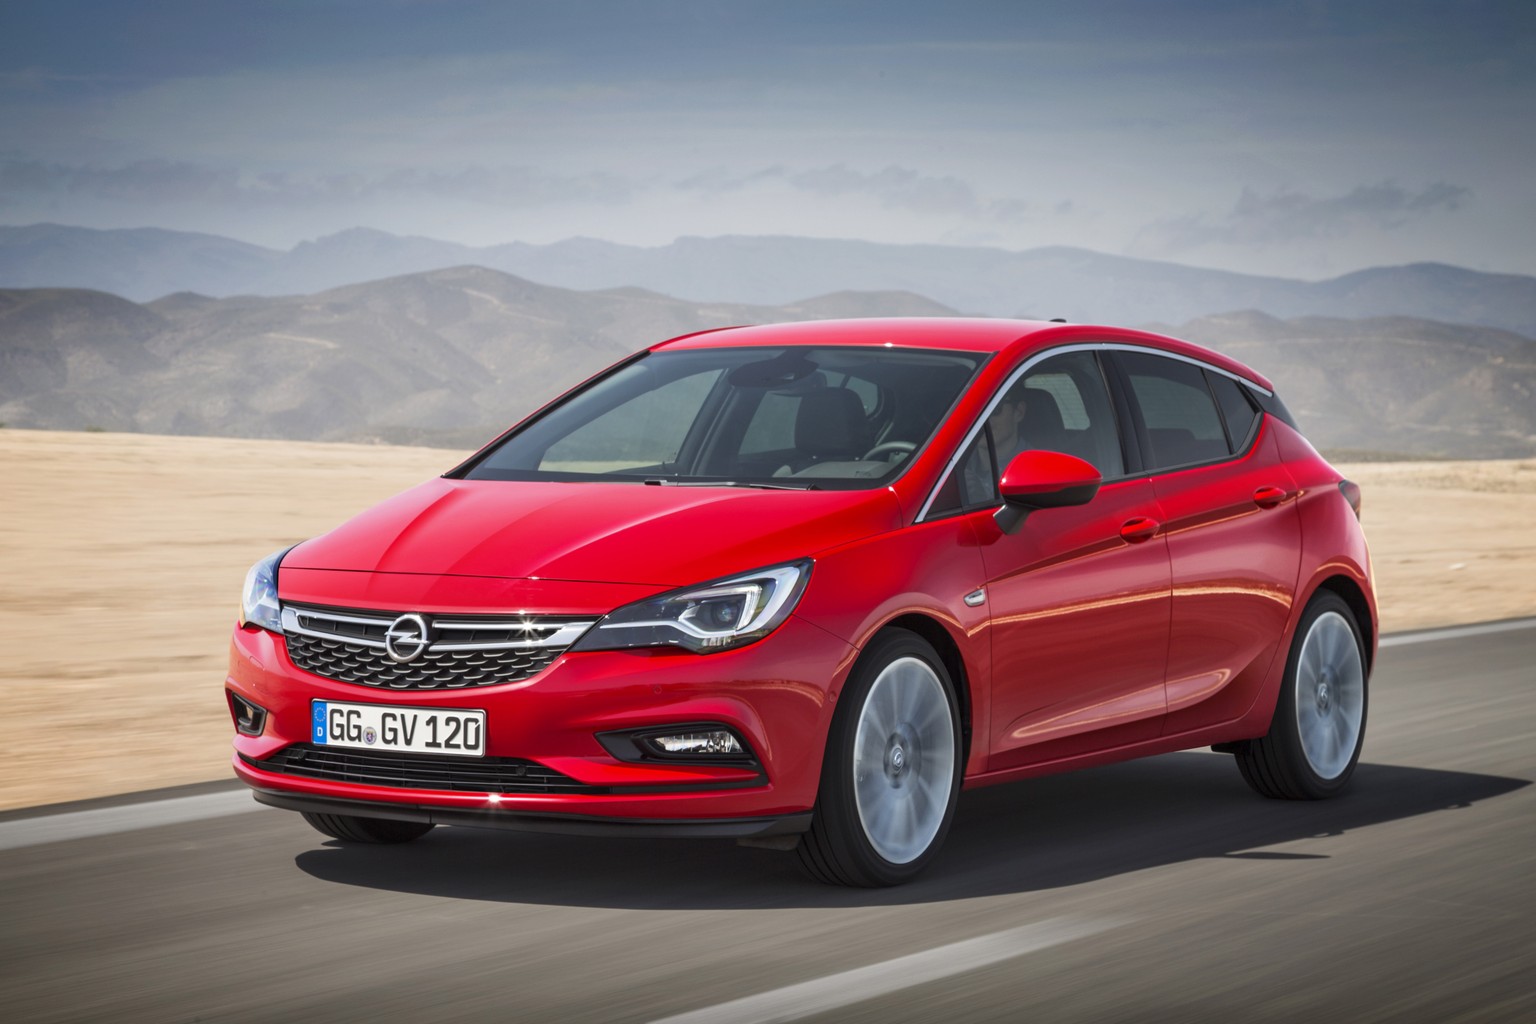 The photo released by General Motors shows the new Opel Astra. GMs redesigned Opel Astra will have its world premiere at the Frankfurt car show. (Opel/GM via AP)